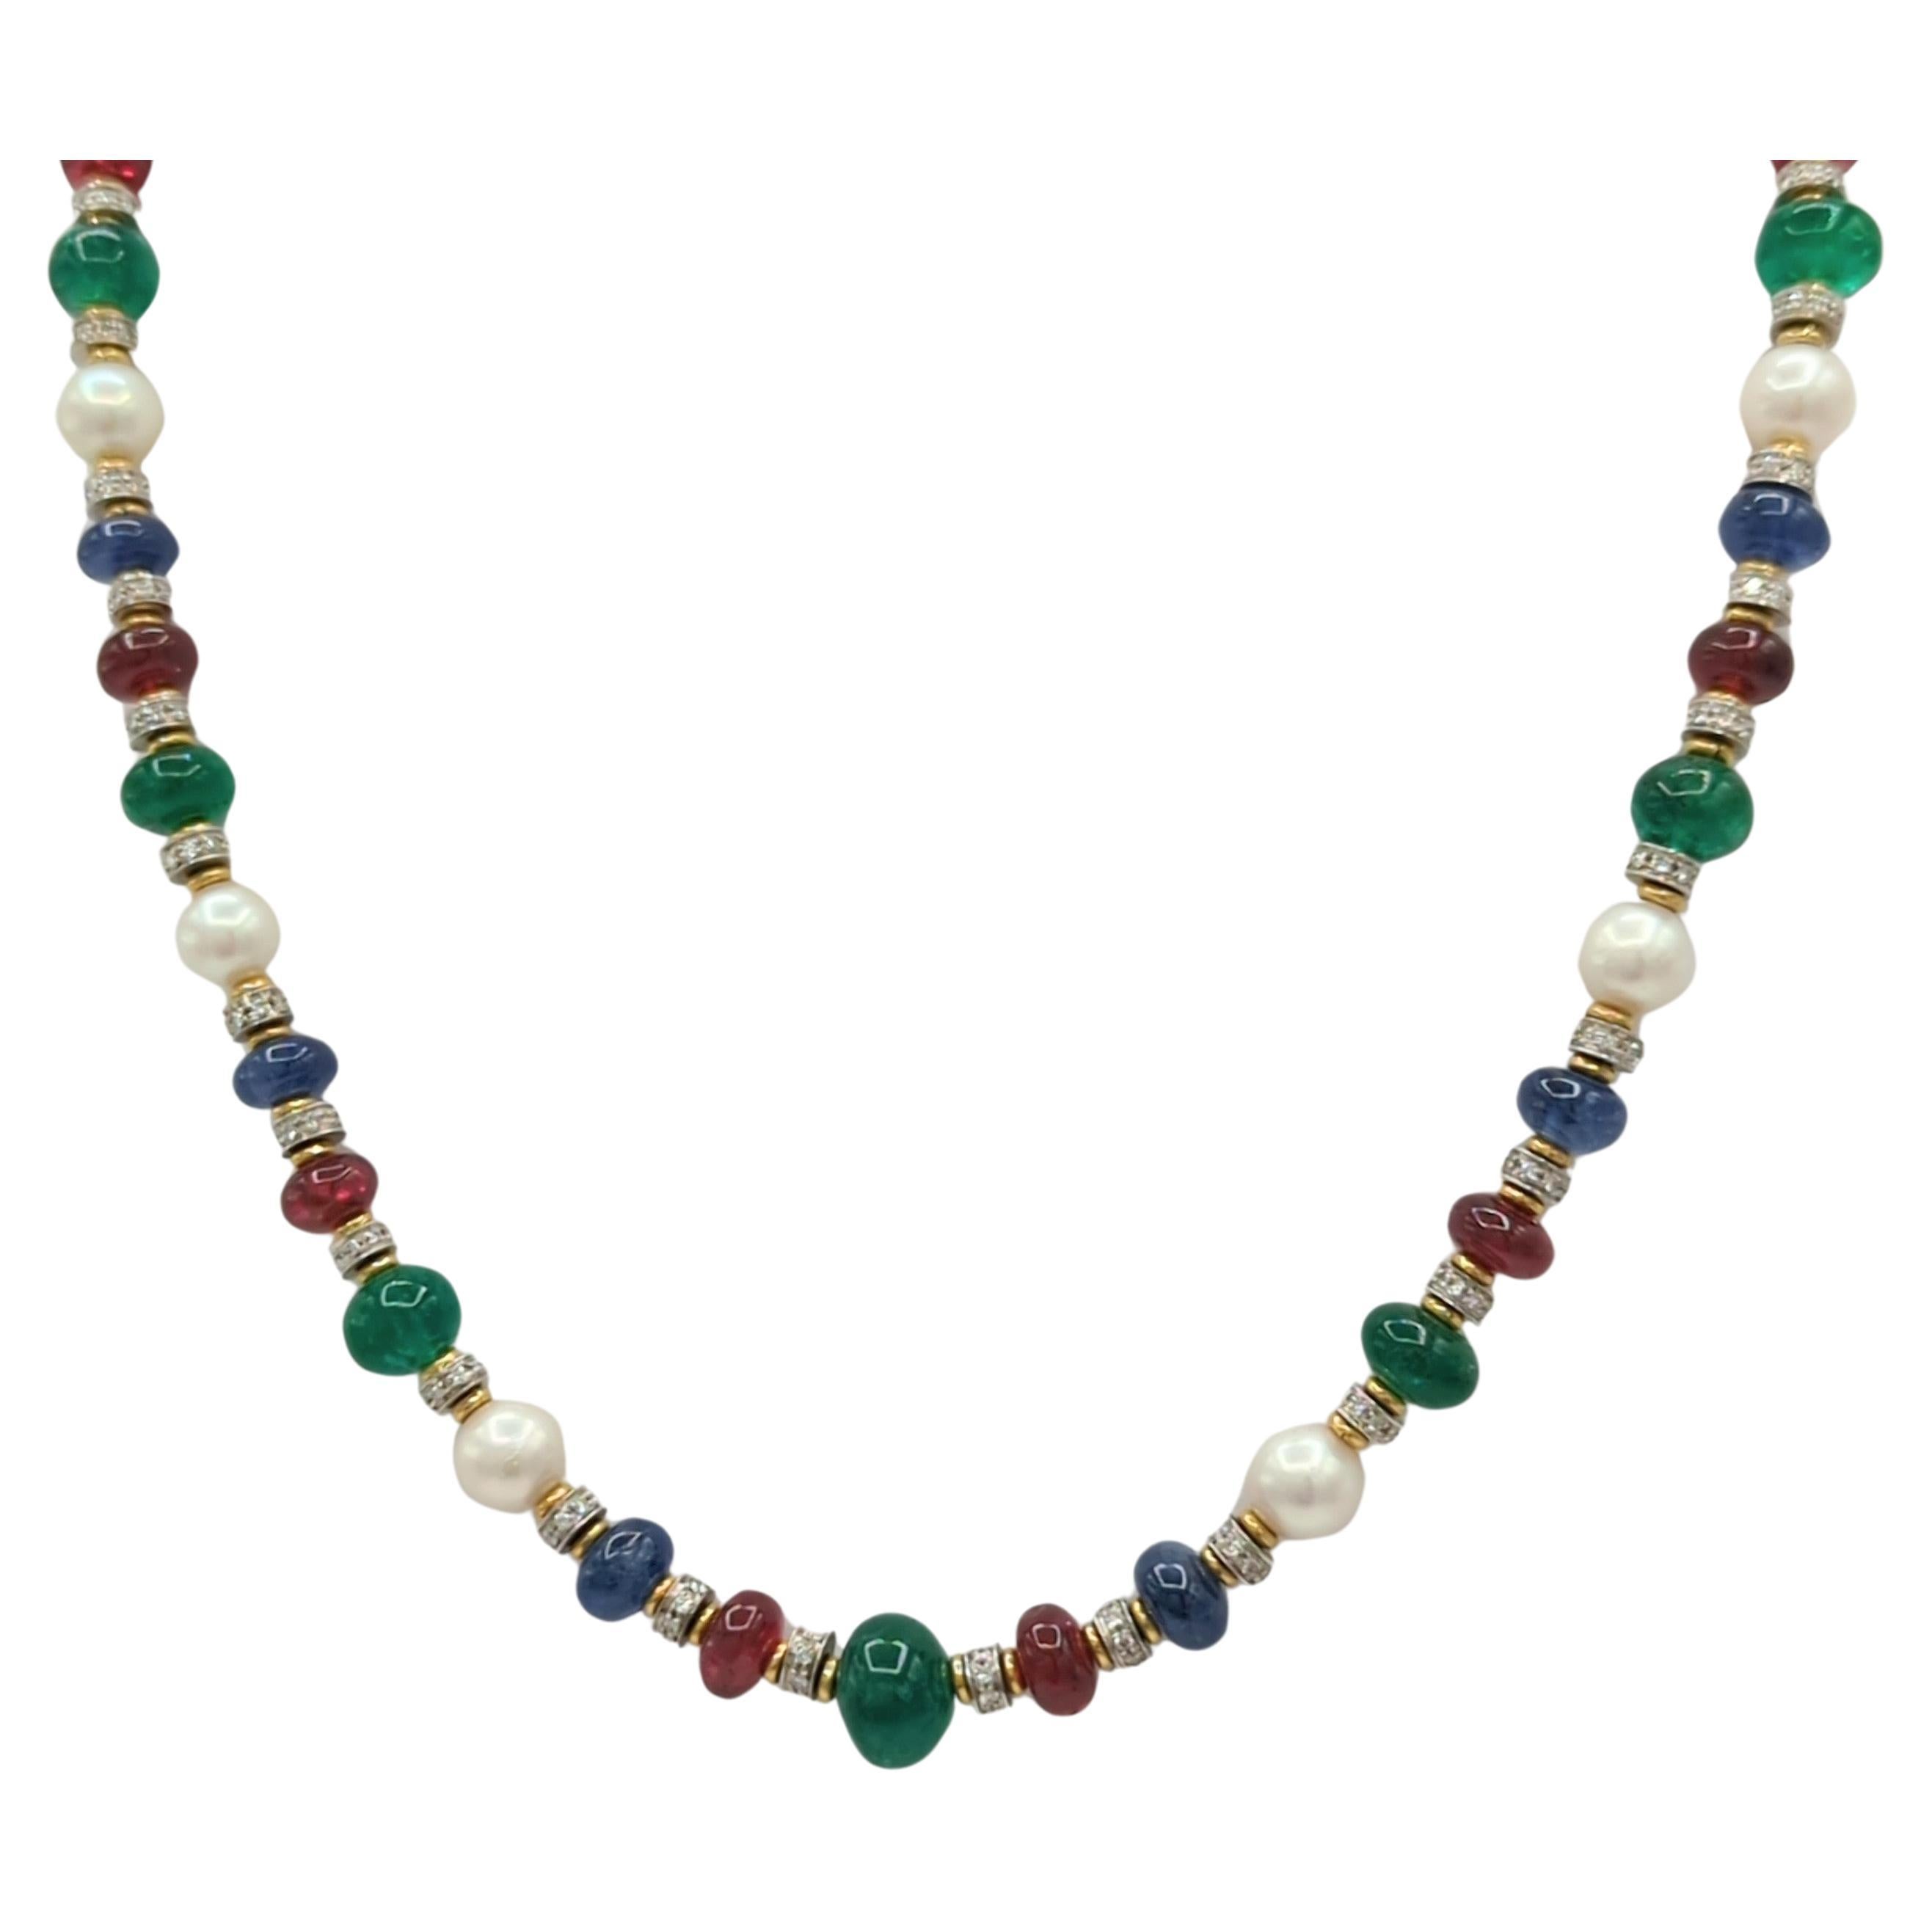 Emerald, Ruby, Sapphire, Pearl and White Diamond Bead Necklace in 18K Gold